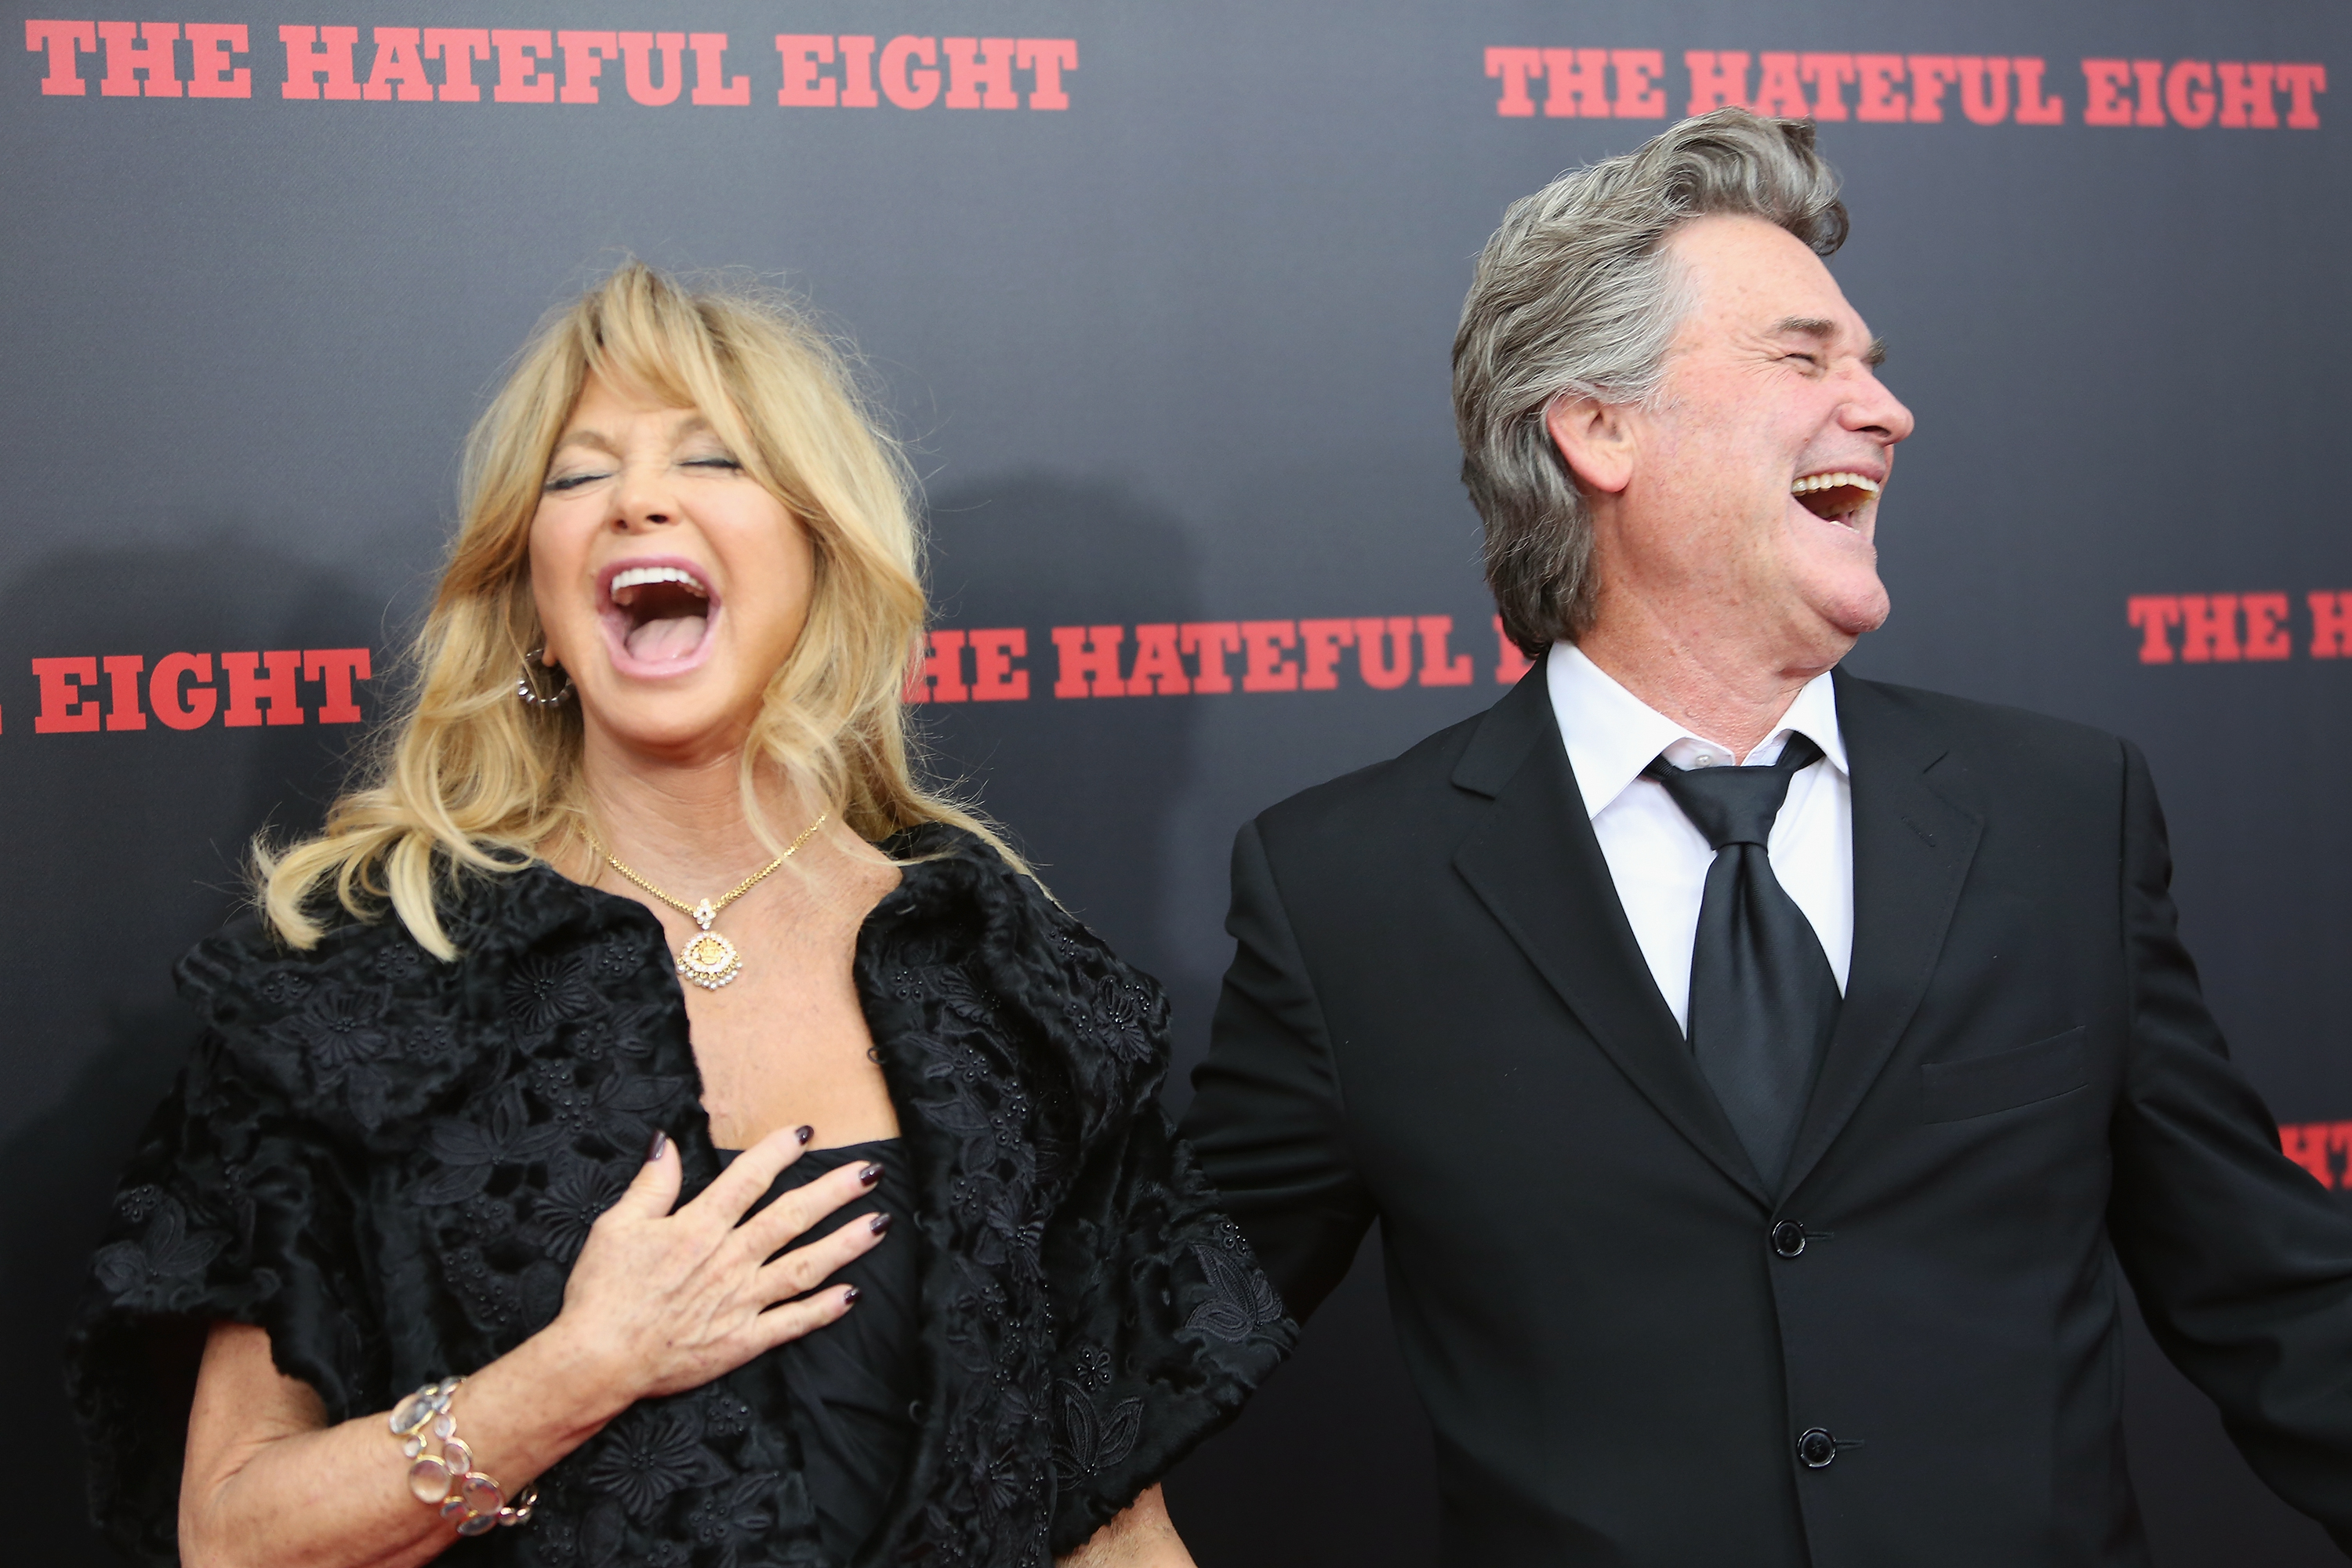 Goldie Hawn and Kurt Russell laugh together as they attend the premiere of "The Hateful Eight" in New York City on December 14, 2015 | Source: Getty Images